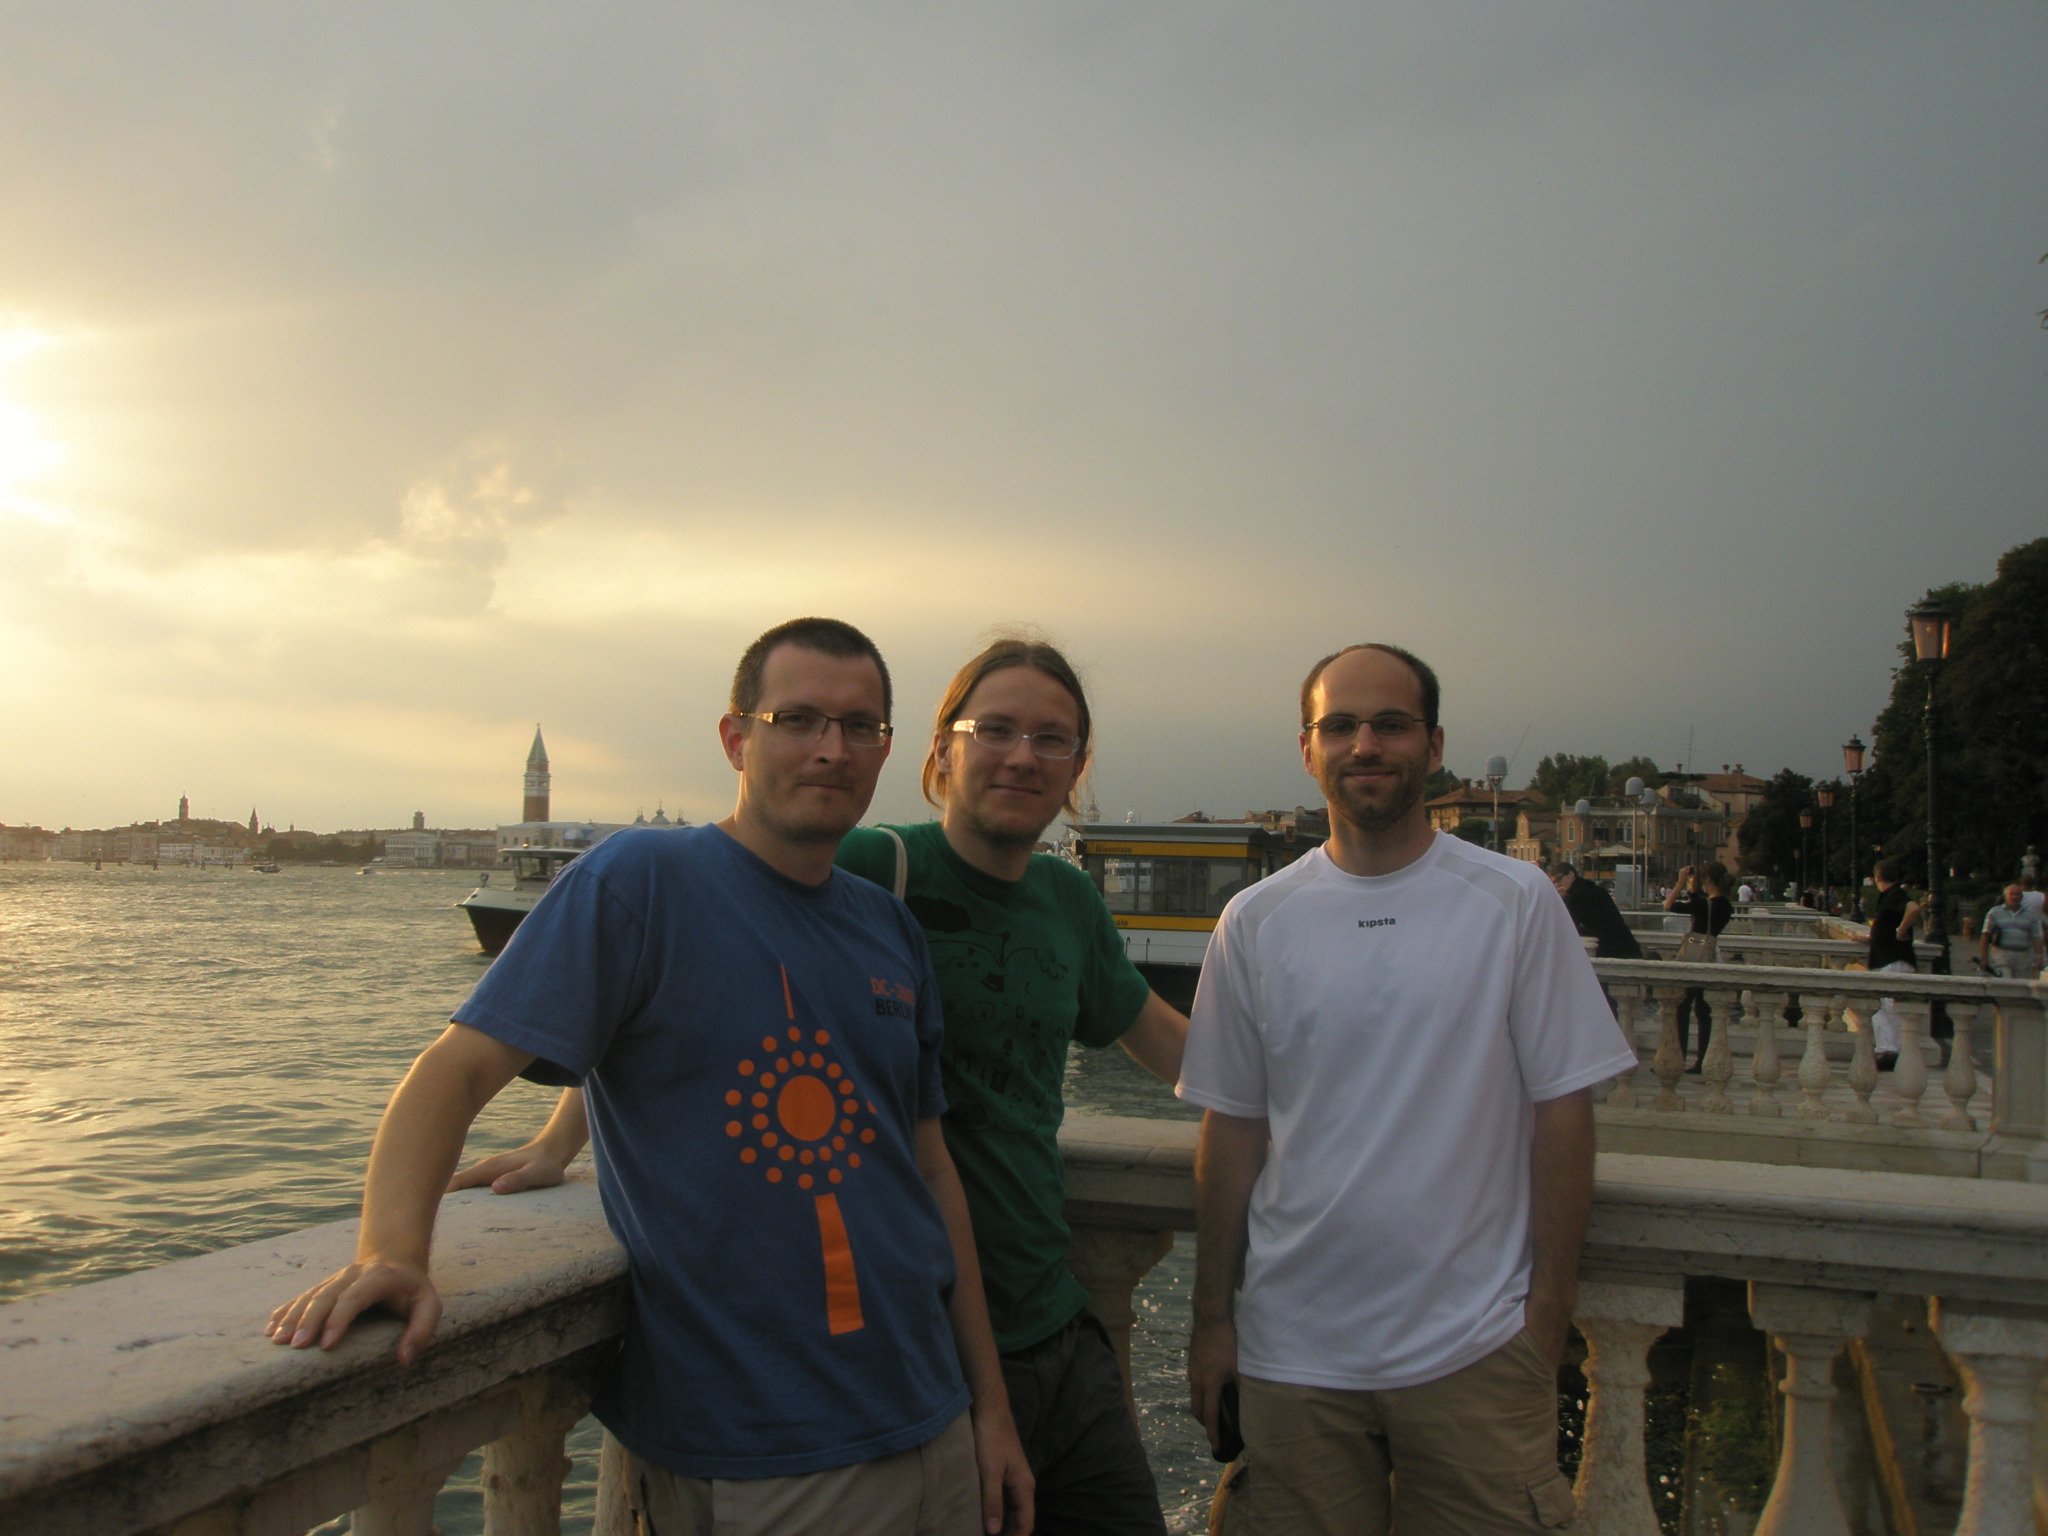 three men pose together on a bridge near the water